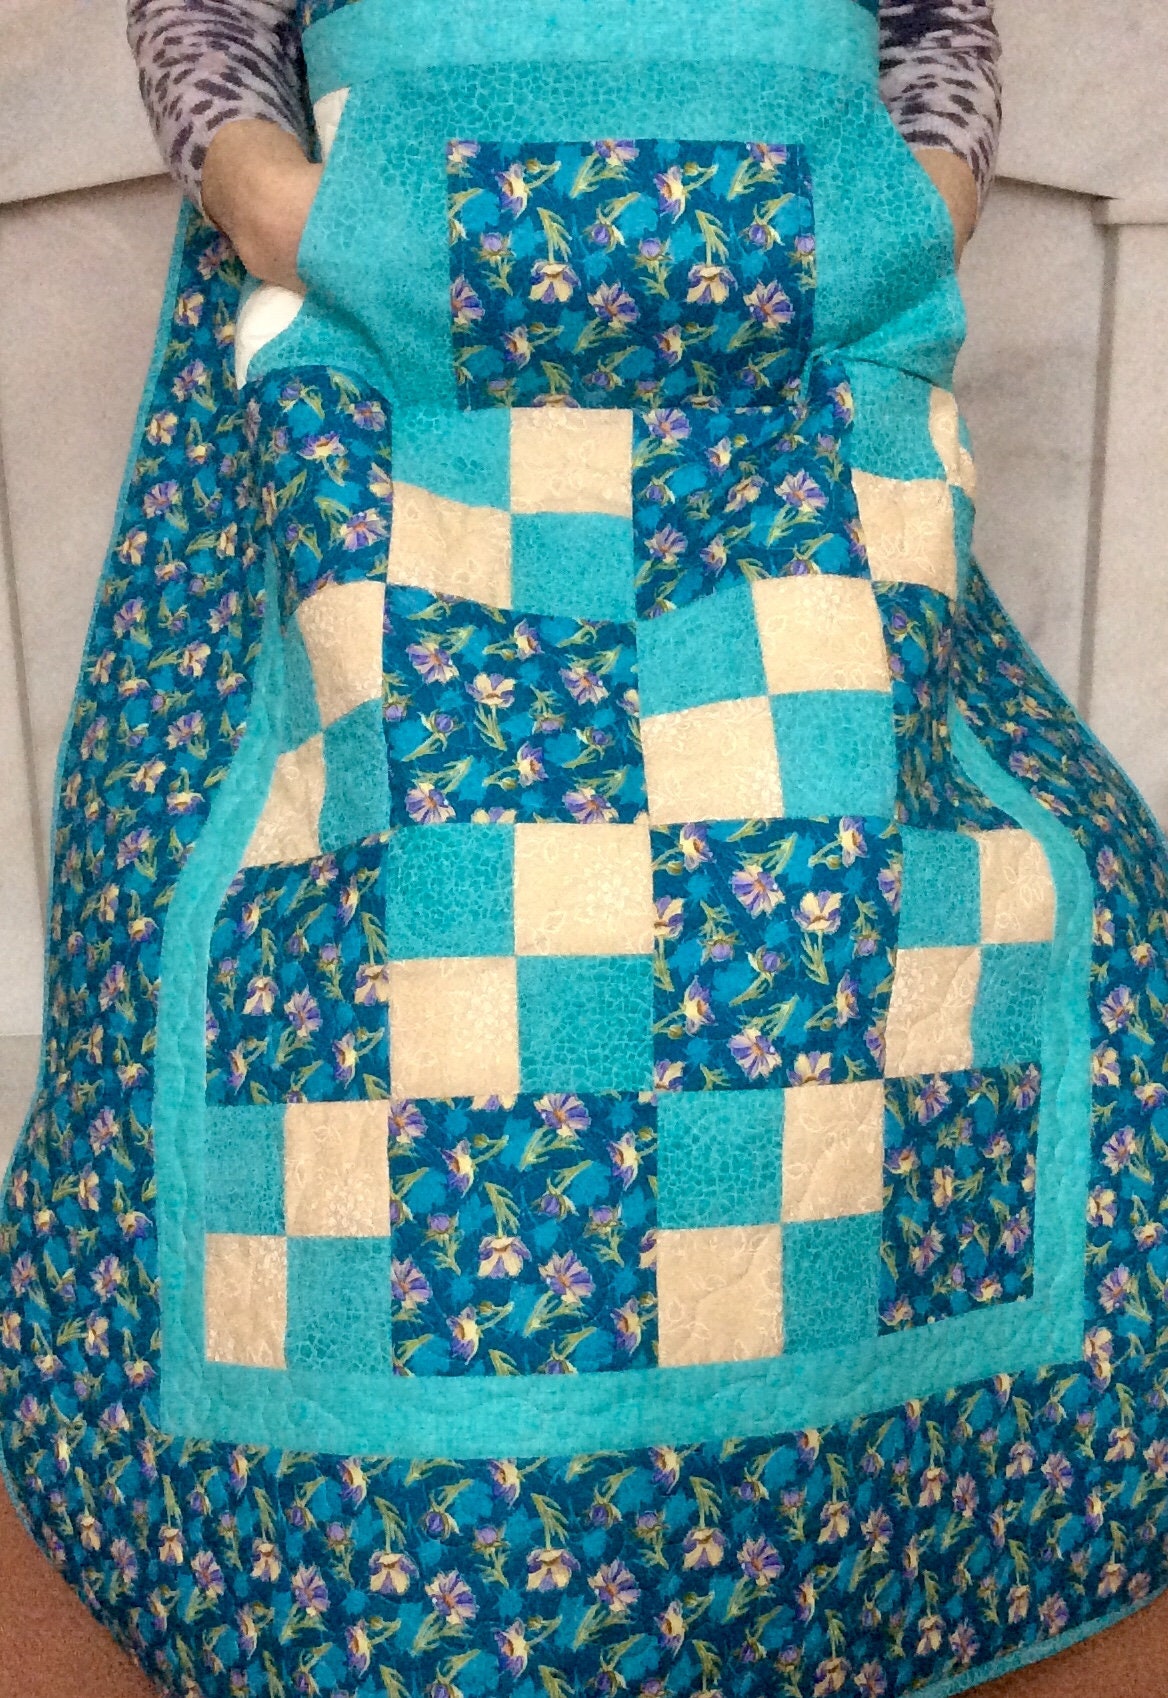 Lap Quilt with Pockets. Wheel chair quilt.